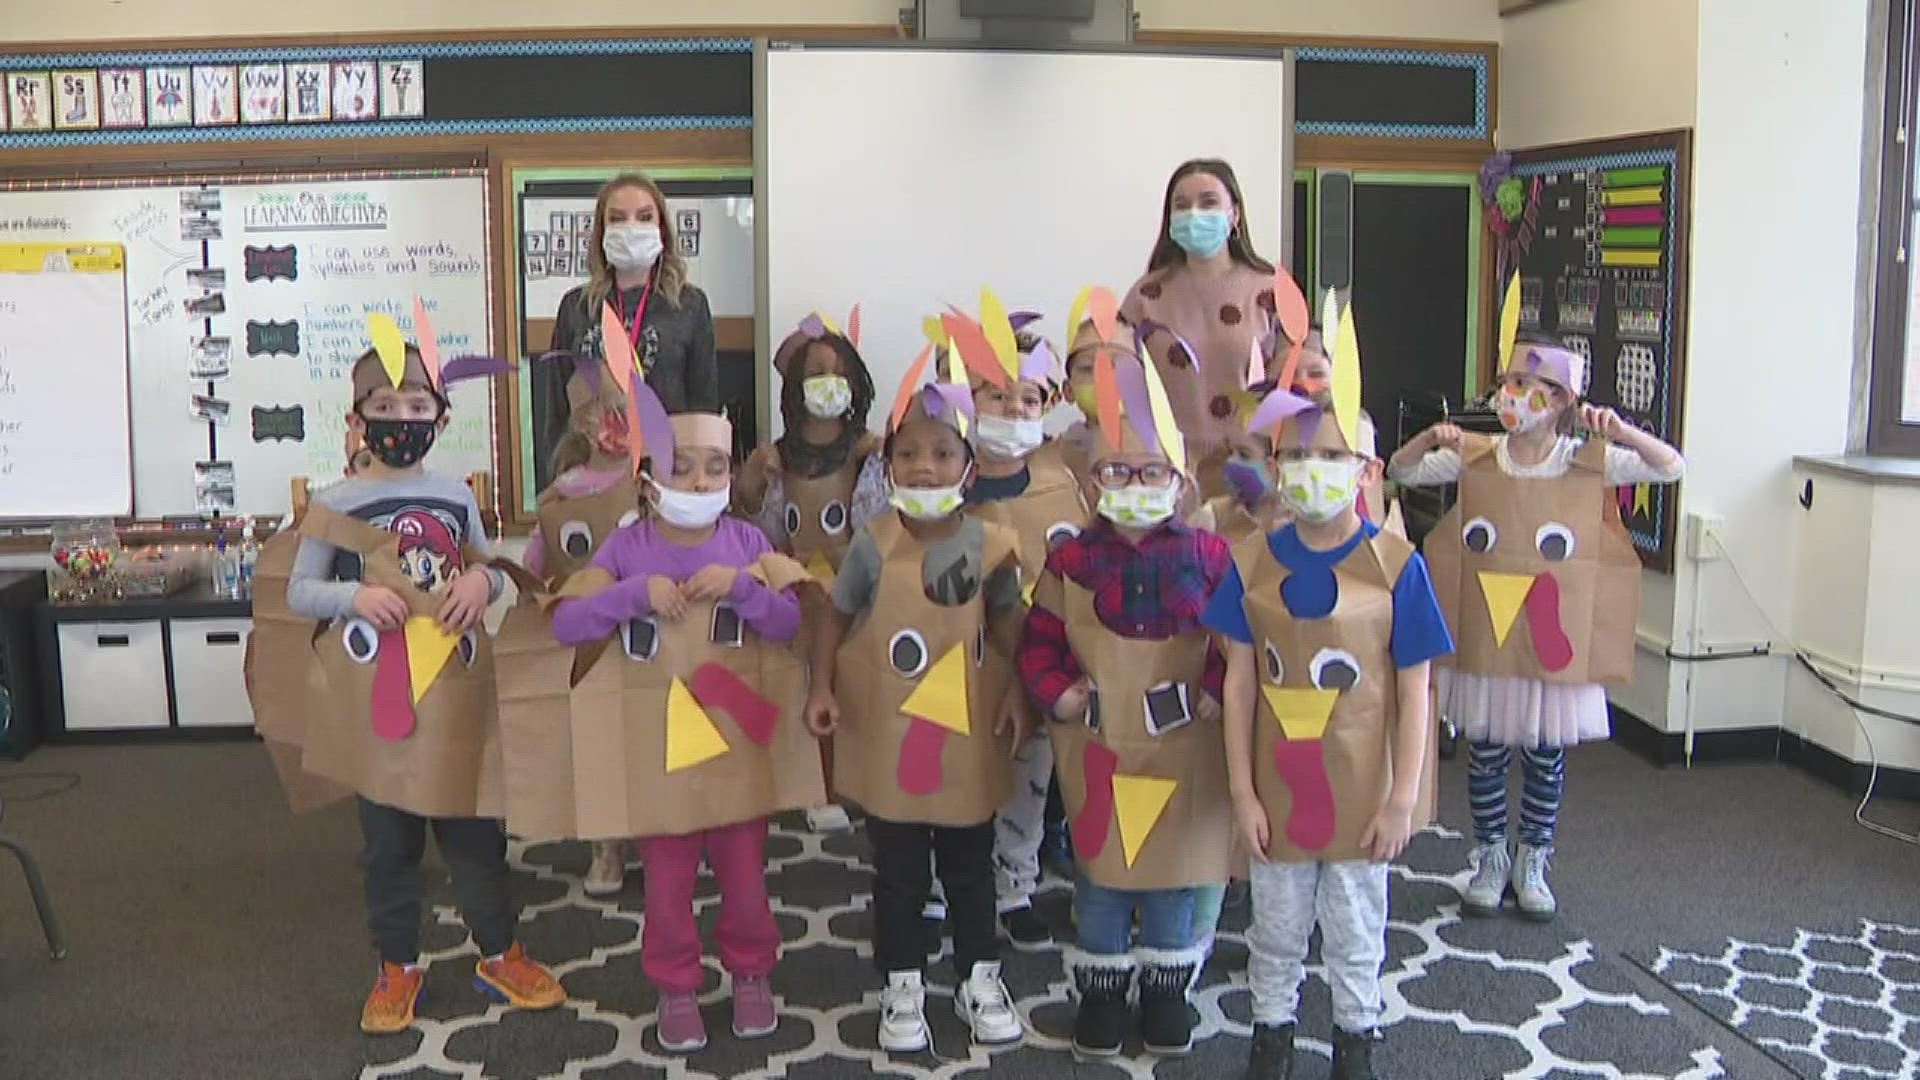 News 8 sat down with a McKinley Elementary School kindergarten class in Davenport to talk all things Thanksgiving.